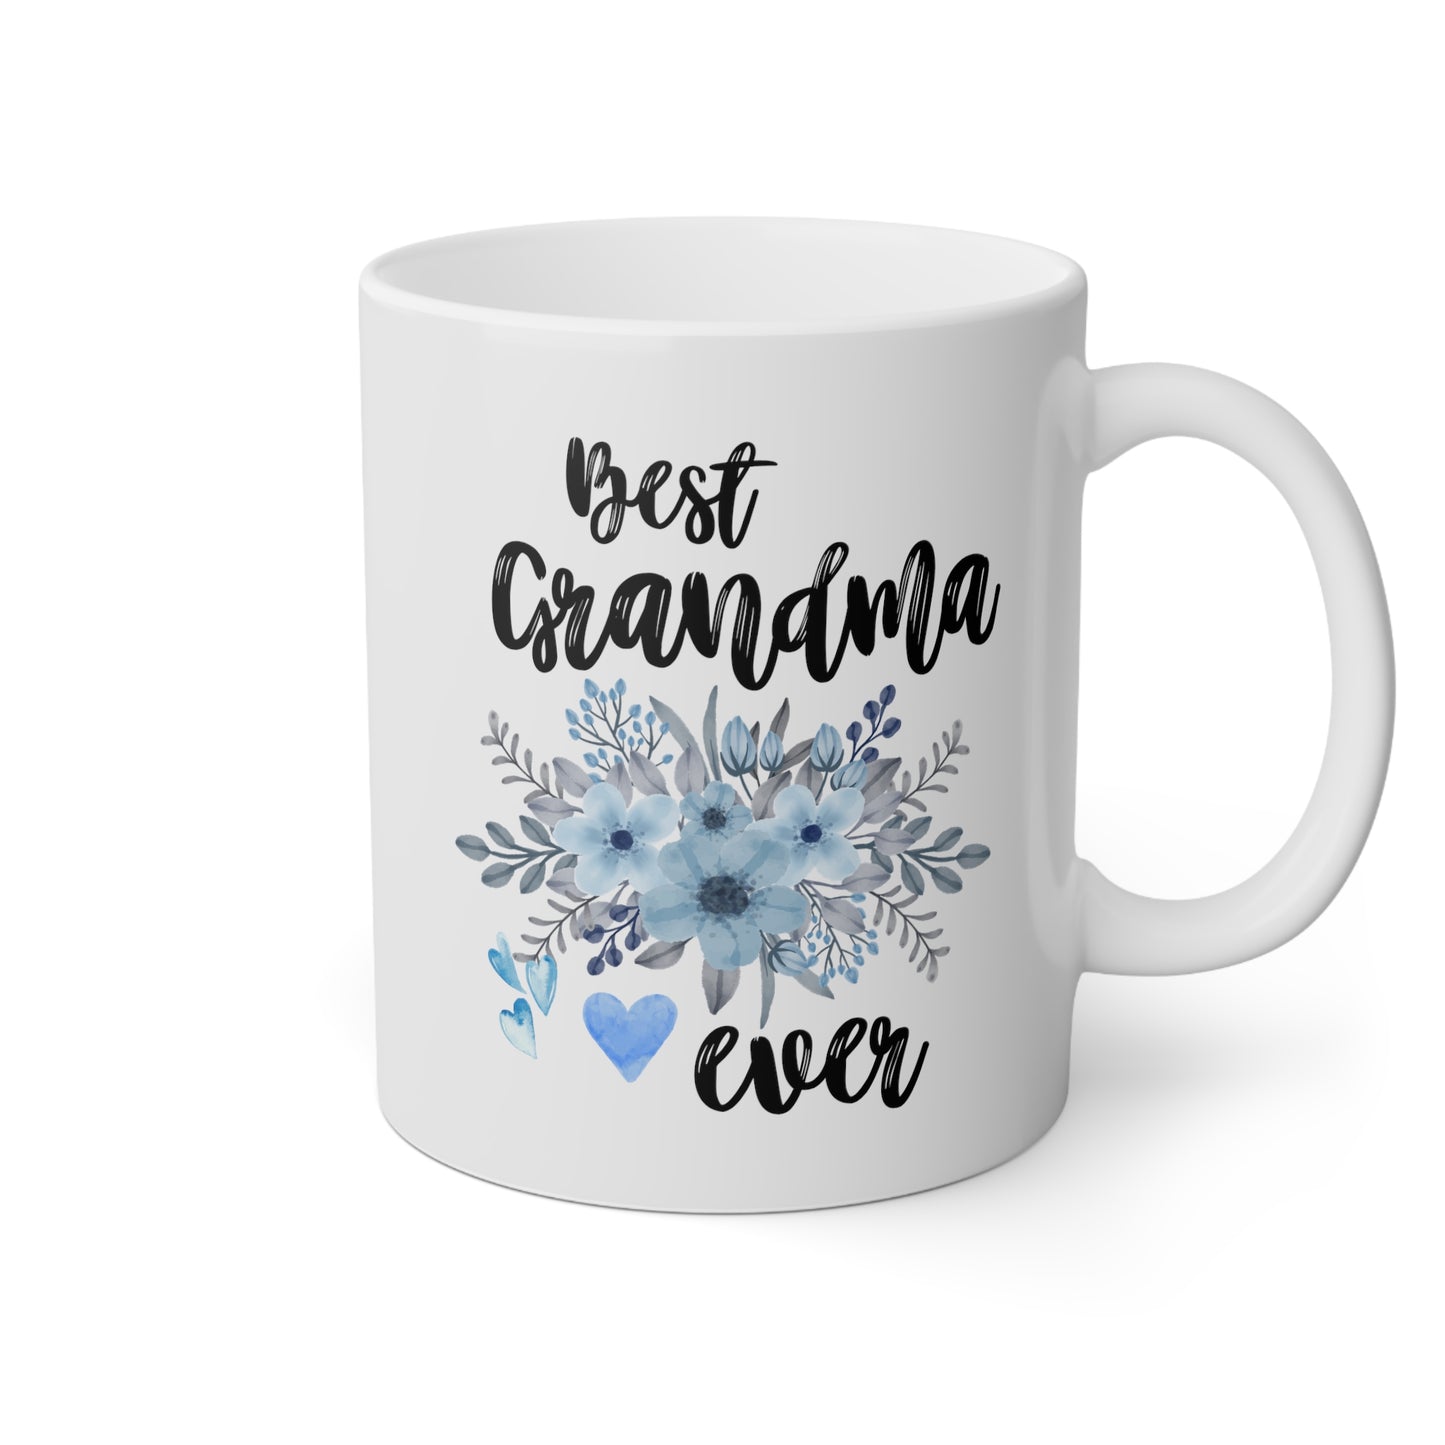 Best Grandma Ever 11oz white funny large coffee mug gift for­ grandmother mother's day flowers floral waveywares wavey wares wavywares wavy wares